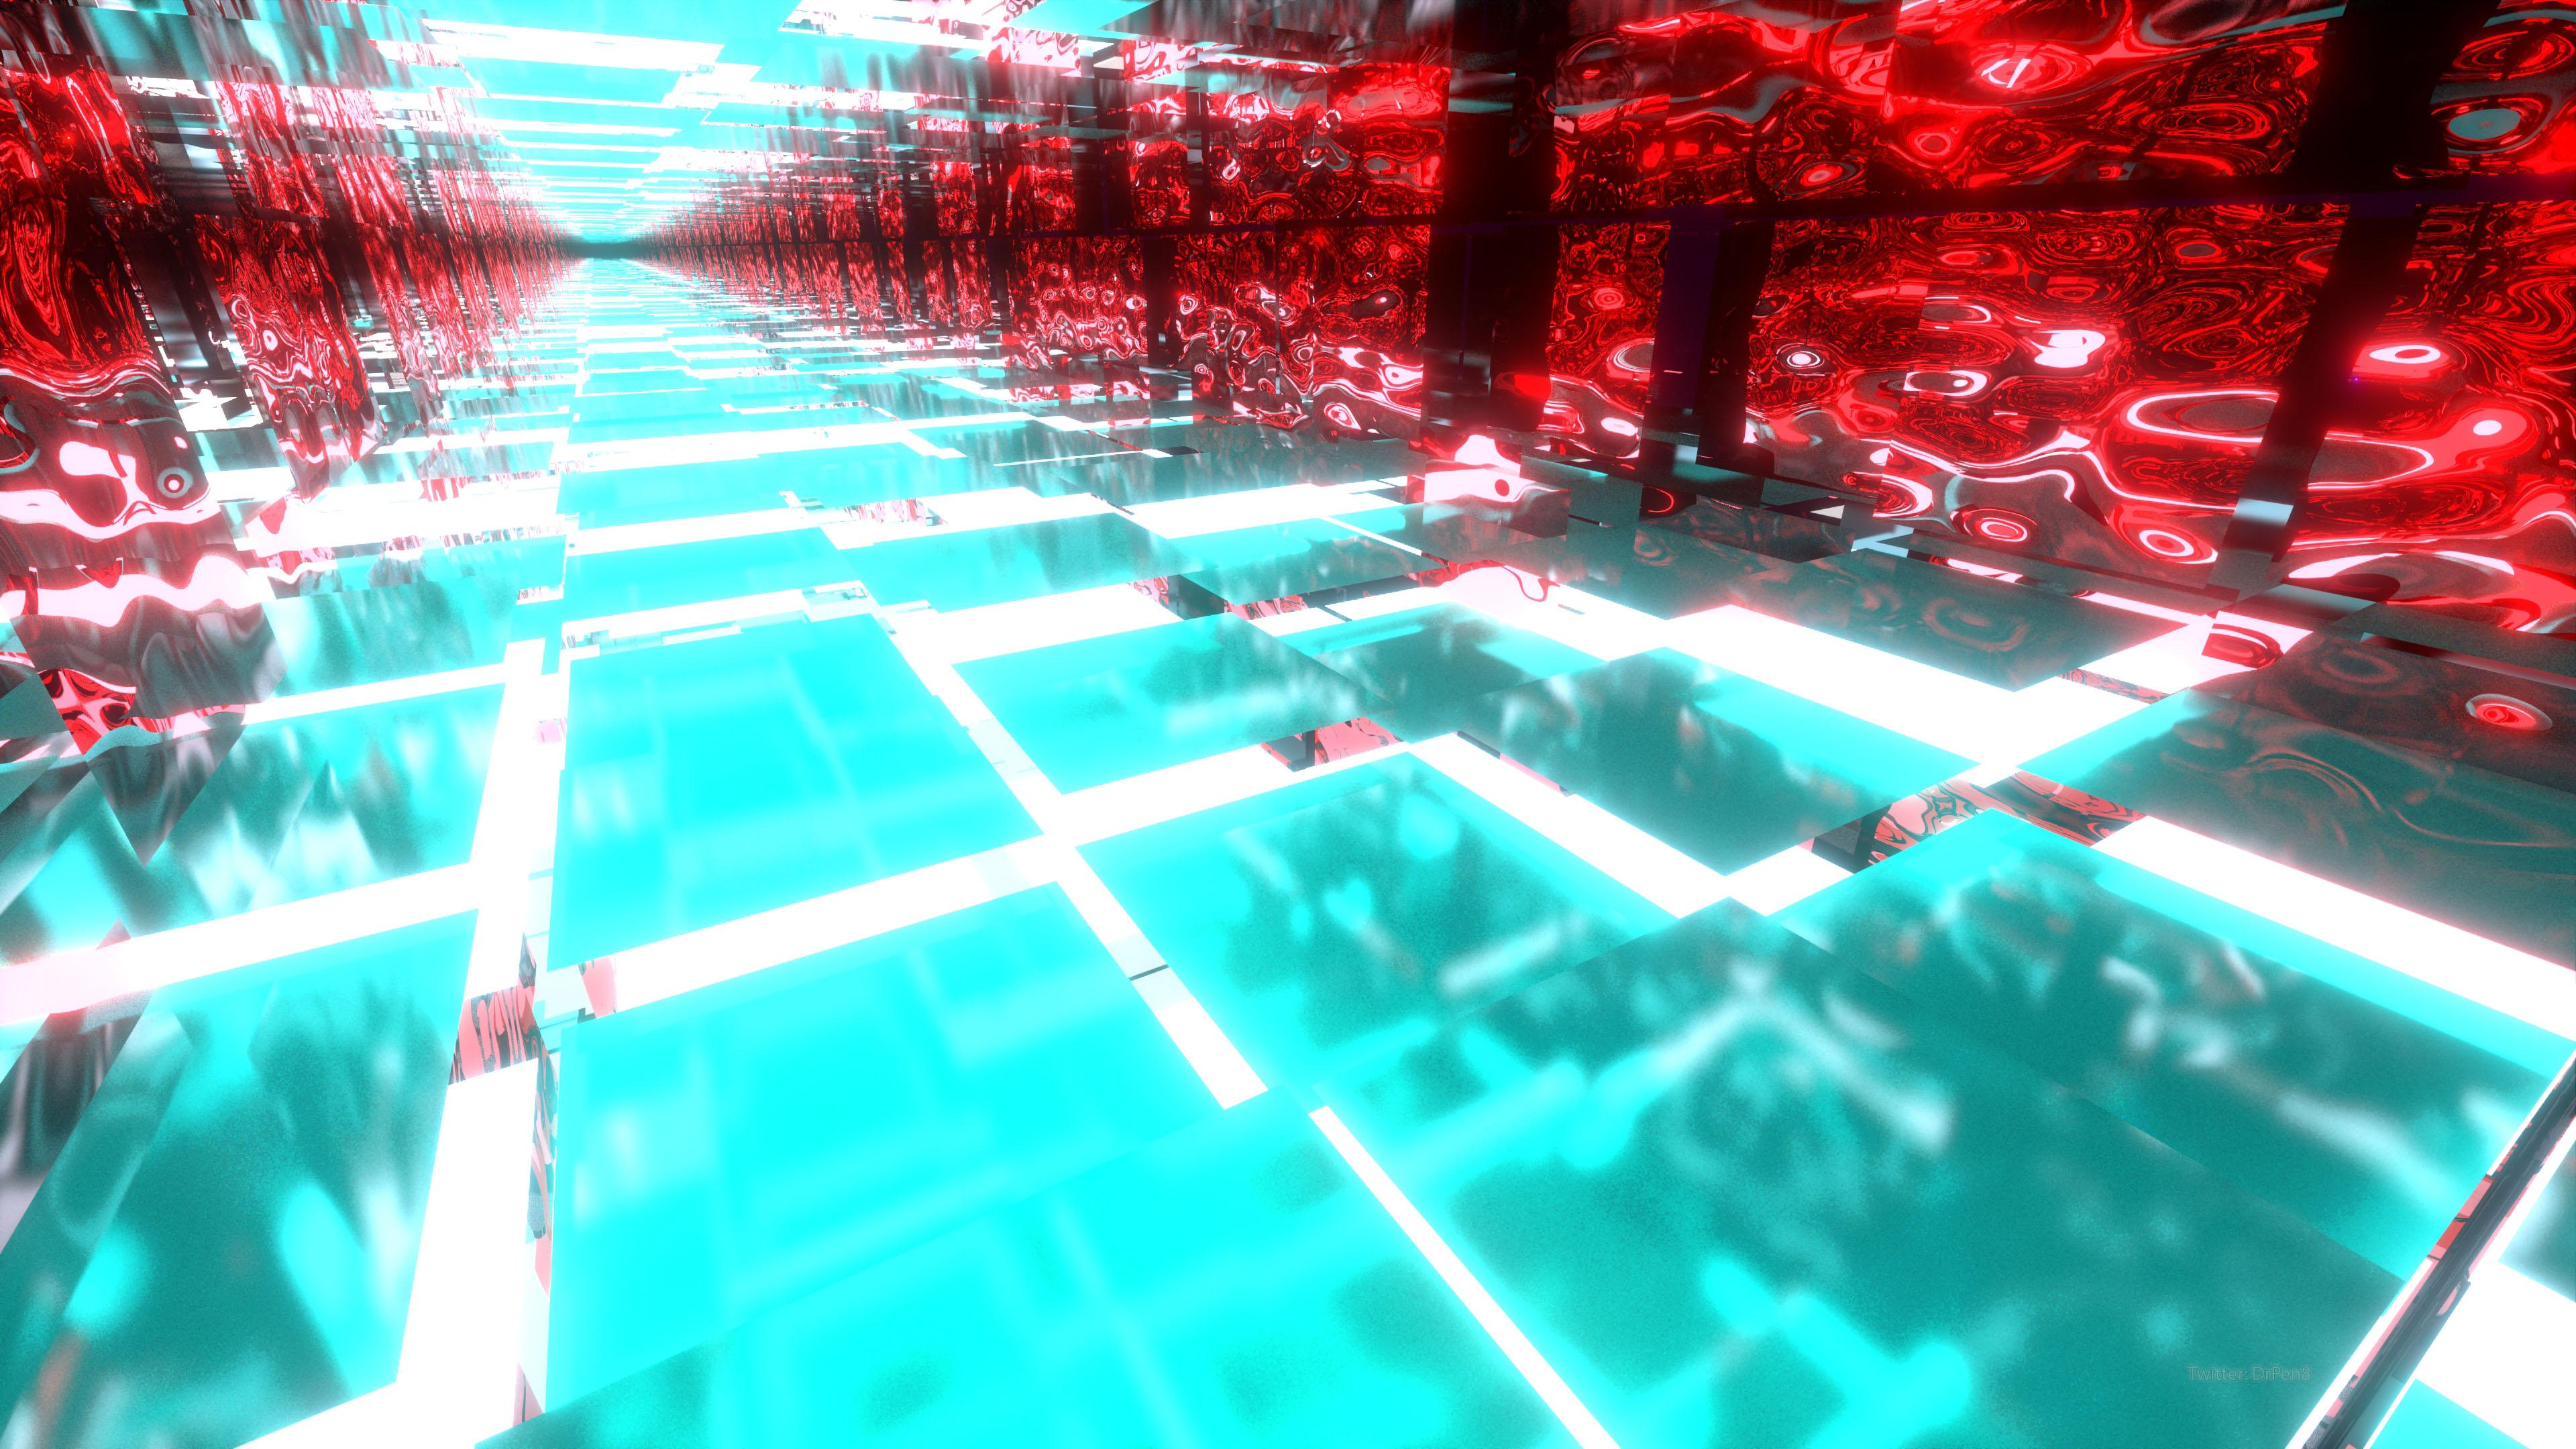 A 3D image of a mirrored room with blue floors and red walls. - Cyan